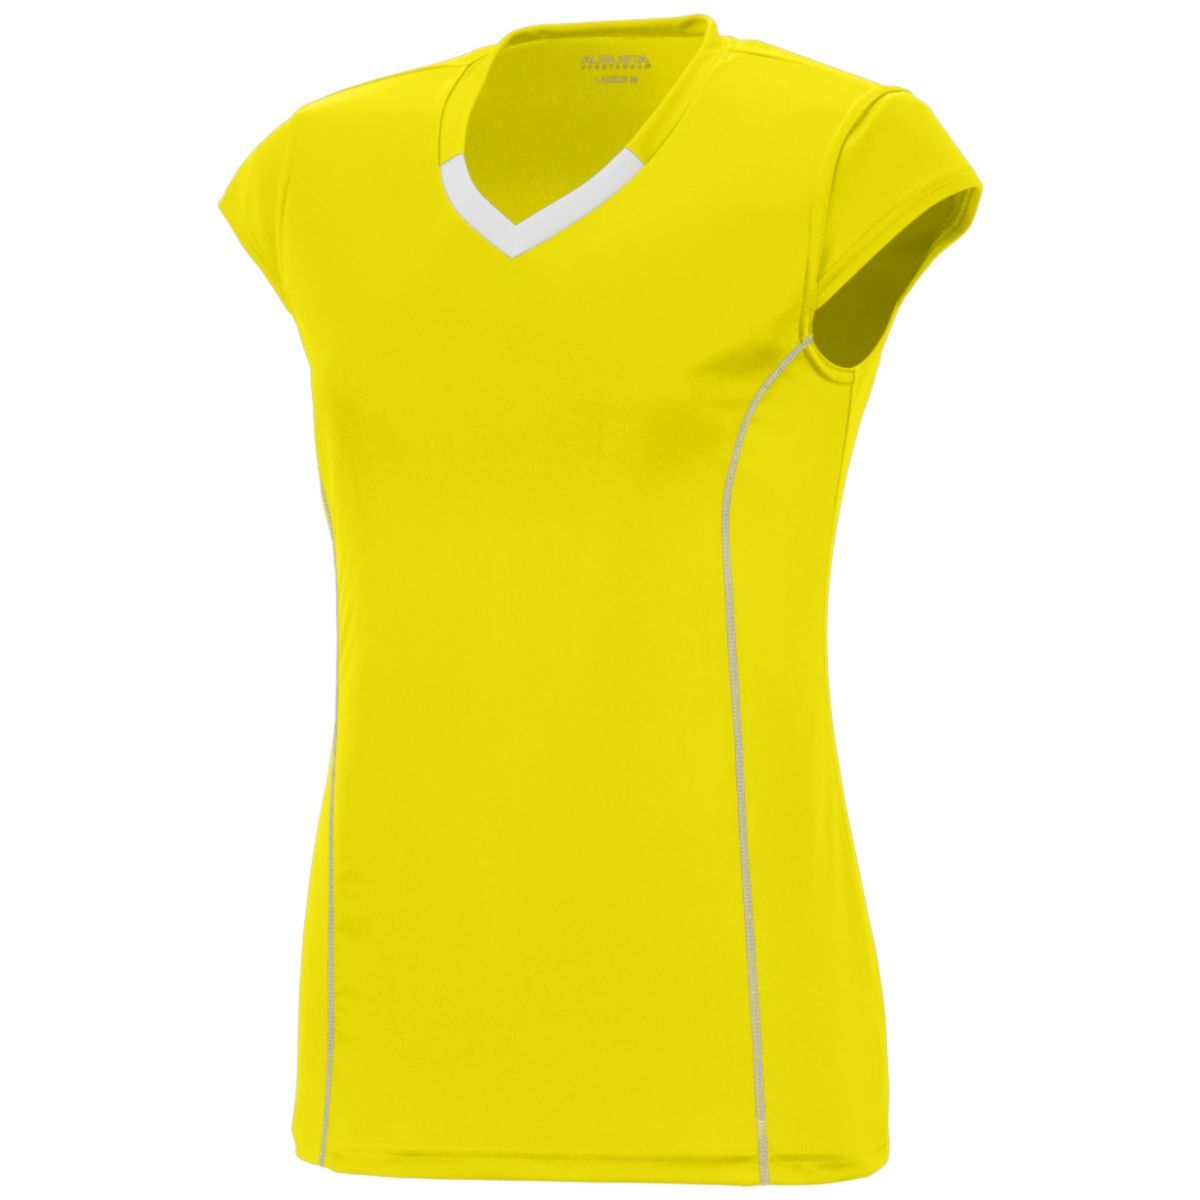 Augusta Sportswear Girls Blash Jersey in Power Yellow/White  -Part of the Girls, Augusta-Products, Volleyball, Girls-Jersey, Shirts product lines at KanaleyCreations.com